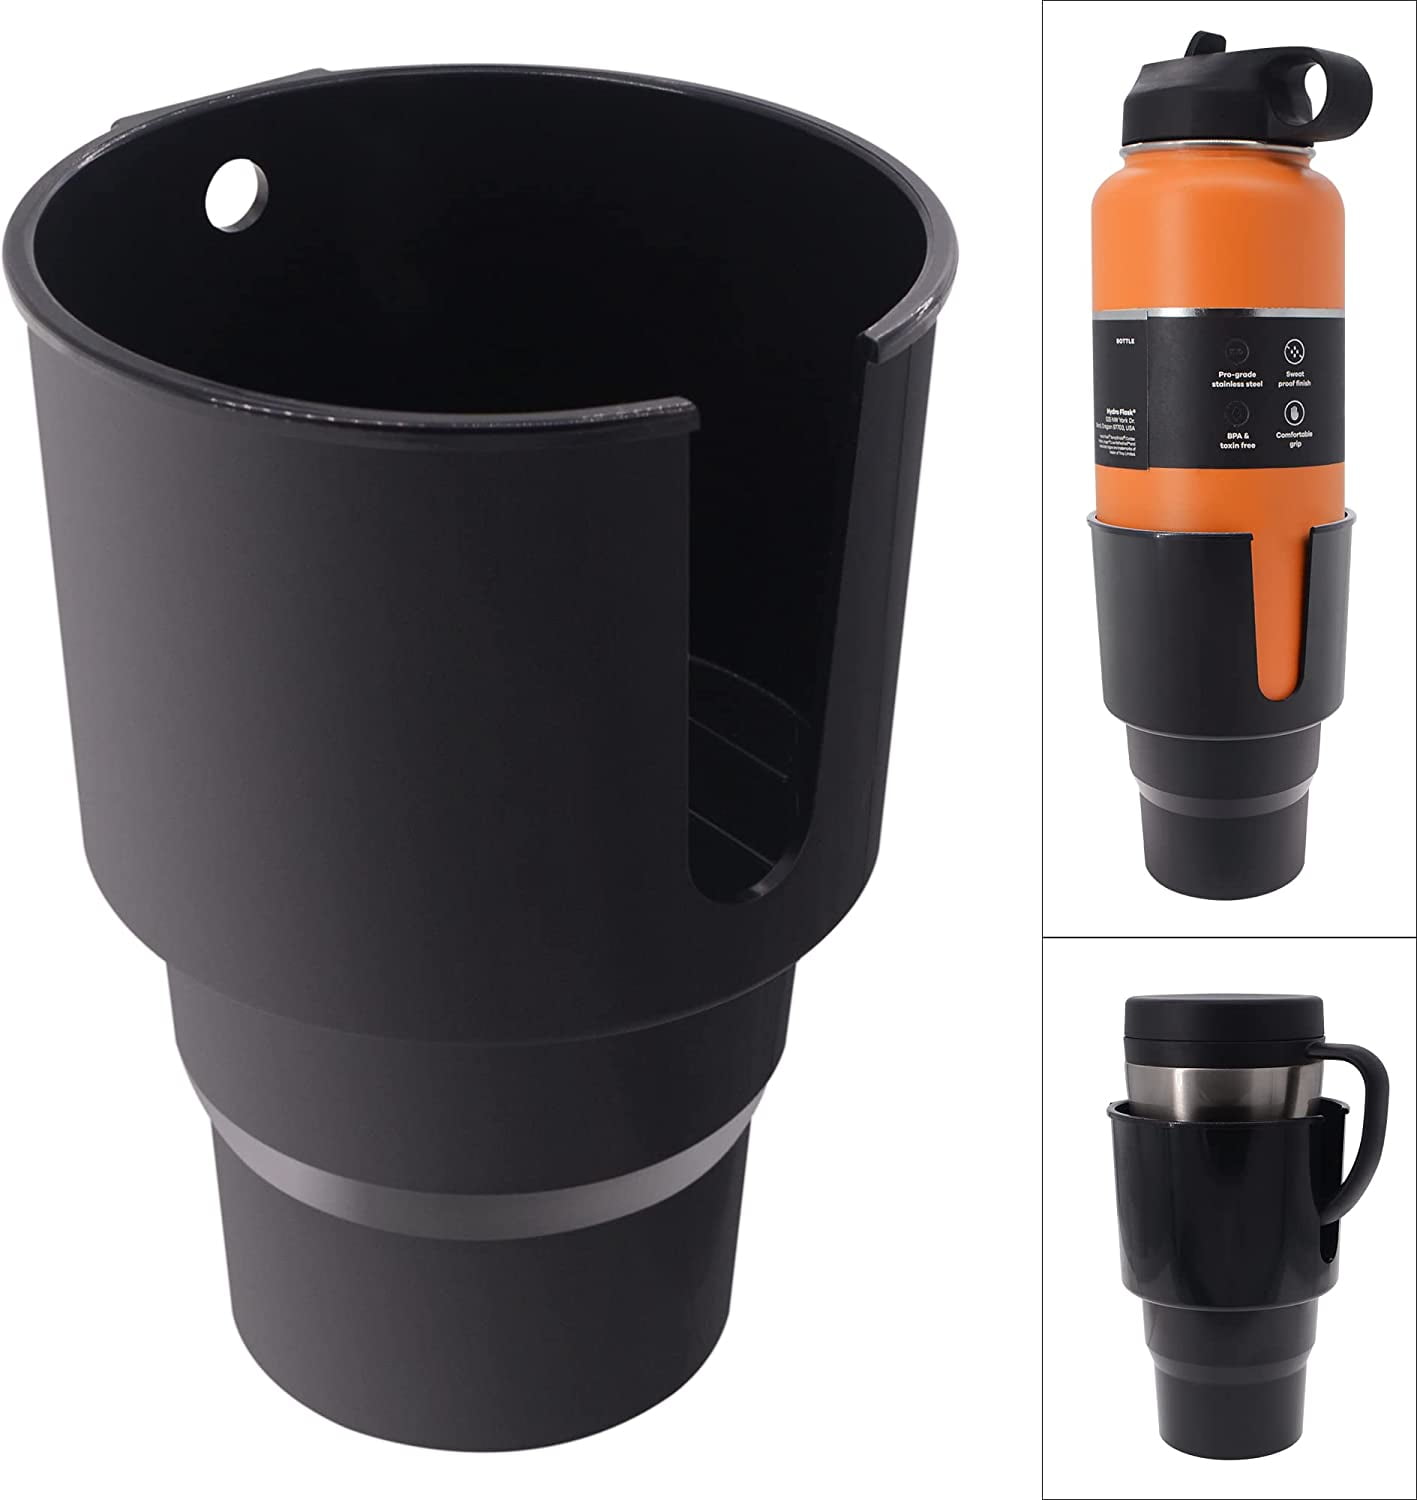 Hydro Flask Cup Holder